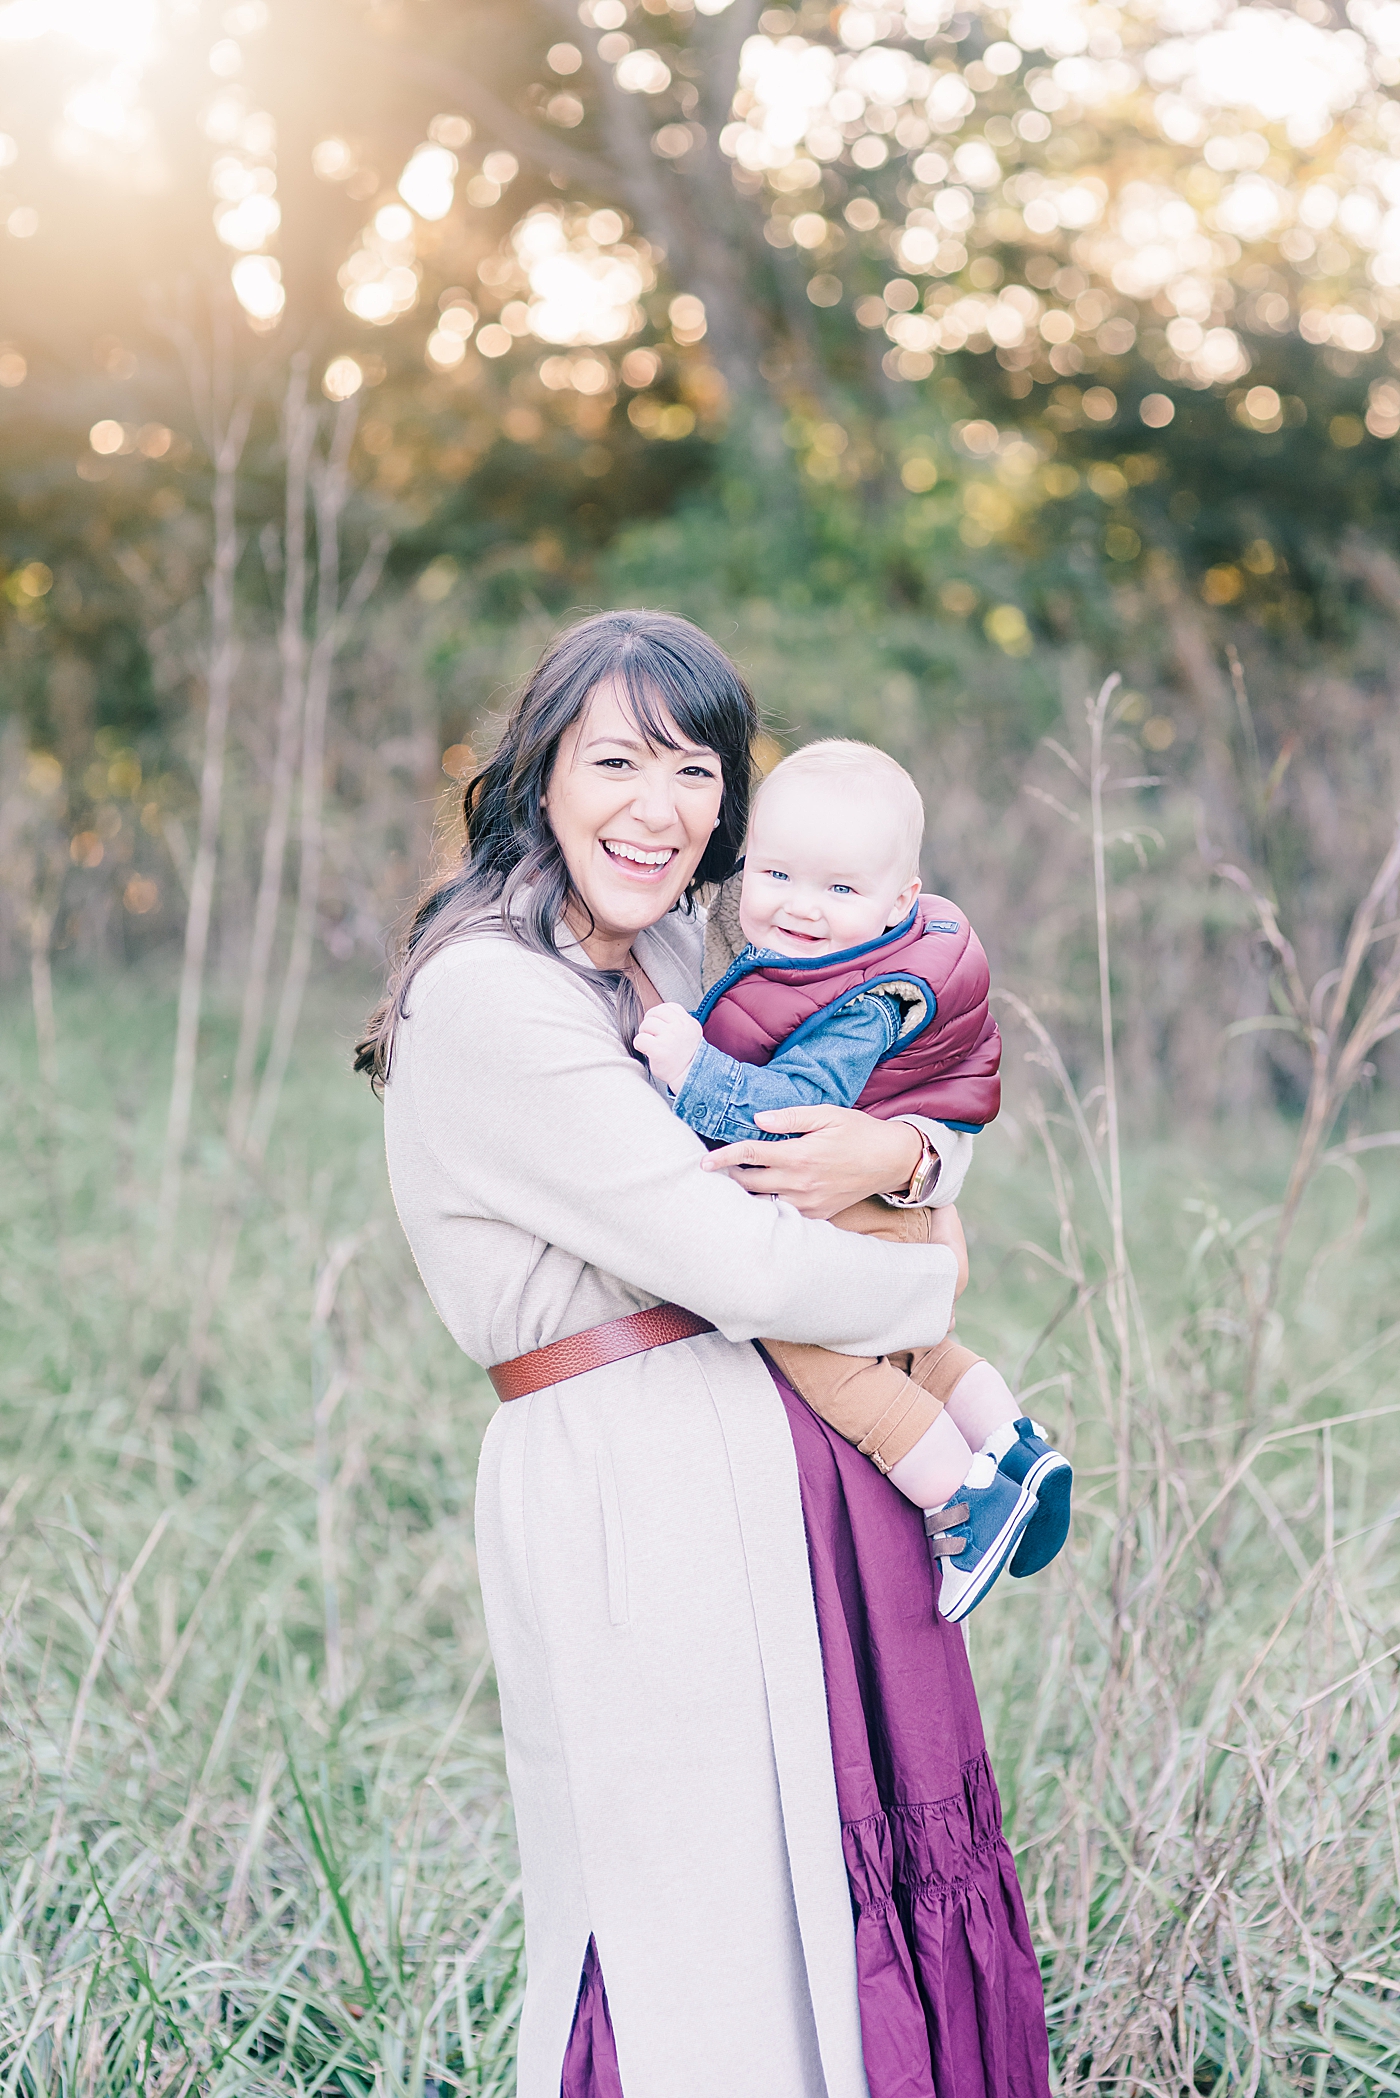 Mom and baby boy in a field | Photo by Davidson Milestone Photographer Anna Wisjo